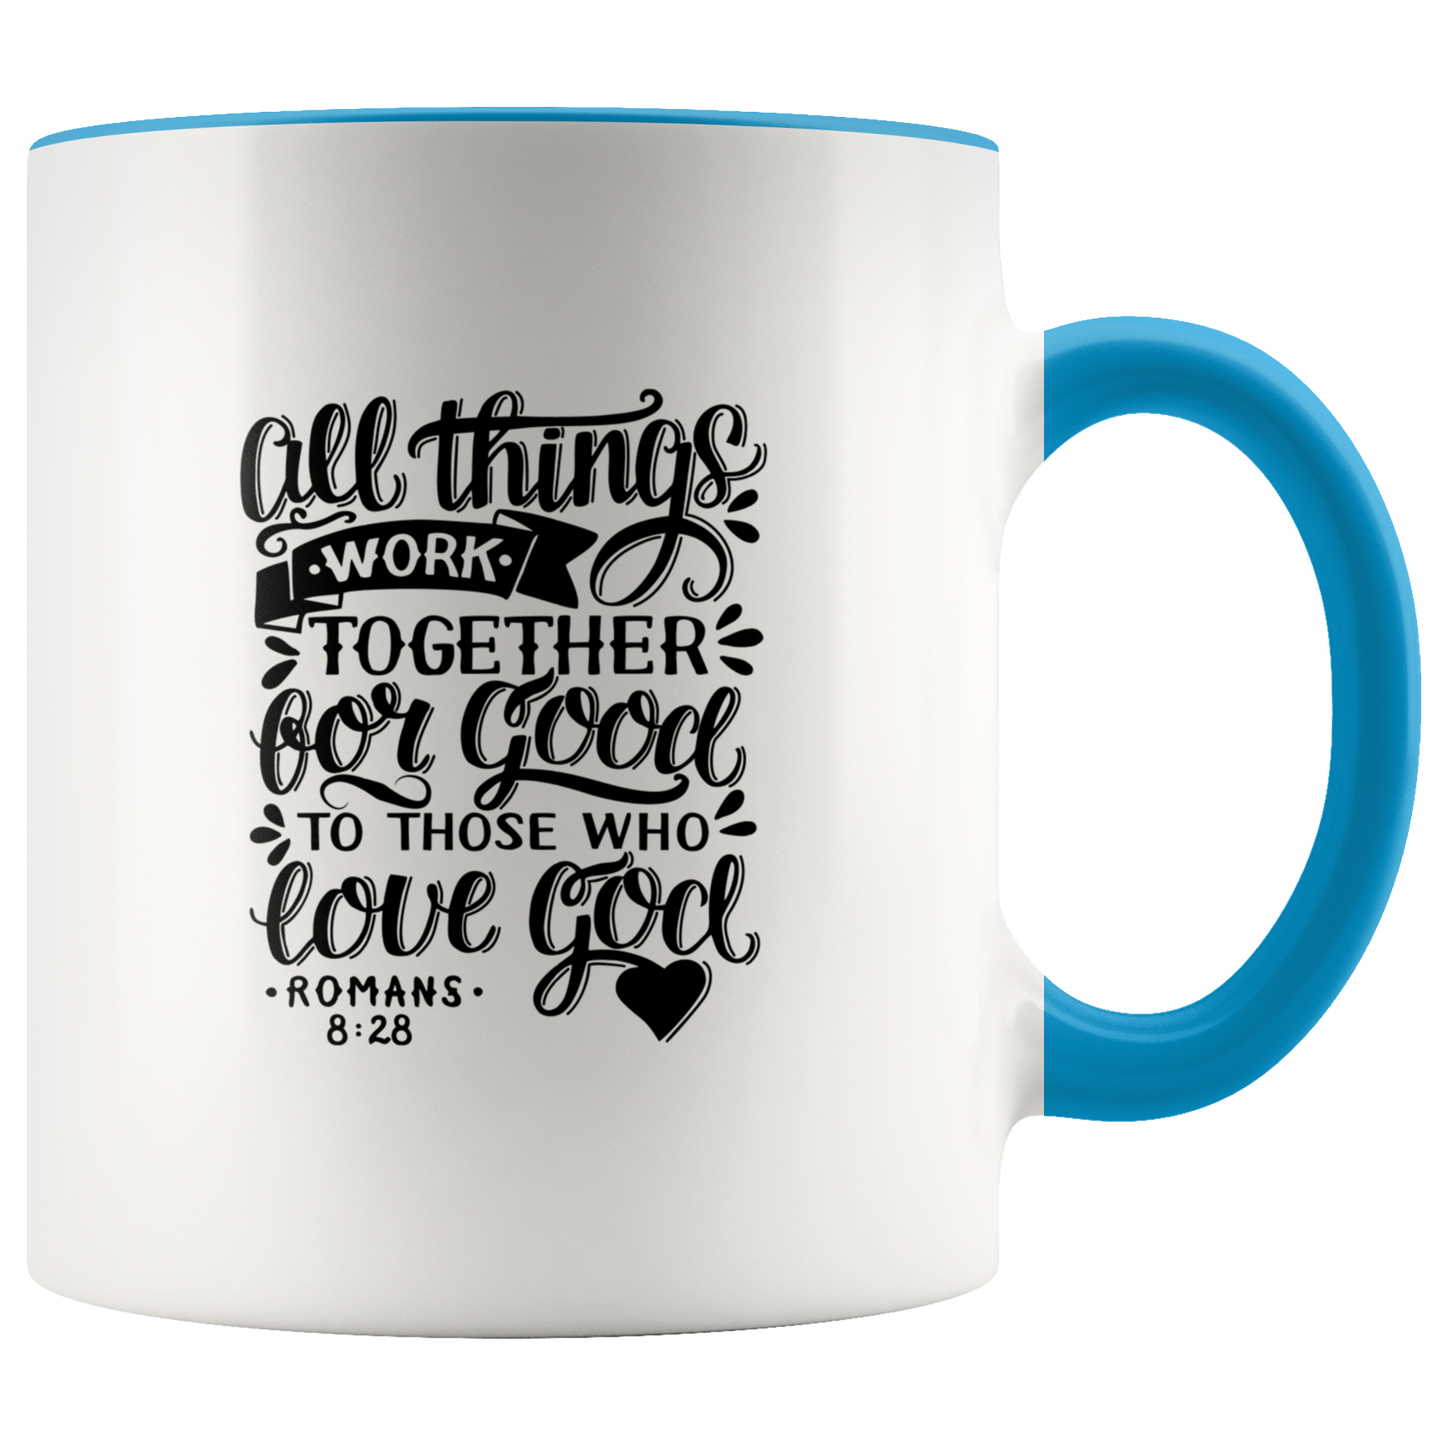 All Things Work Together For Good To Those Who Love God, Romans 8:28 - Accent Mug baby blue